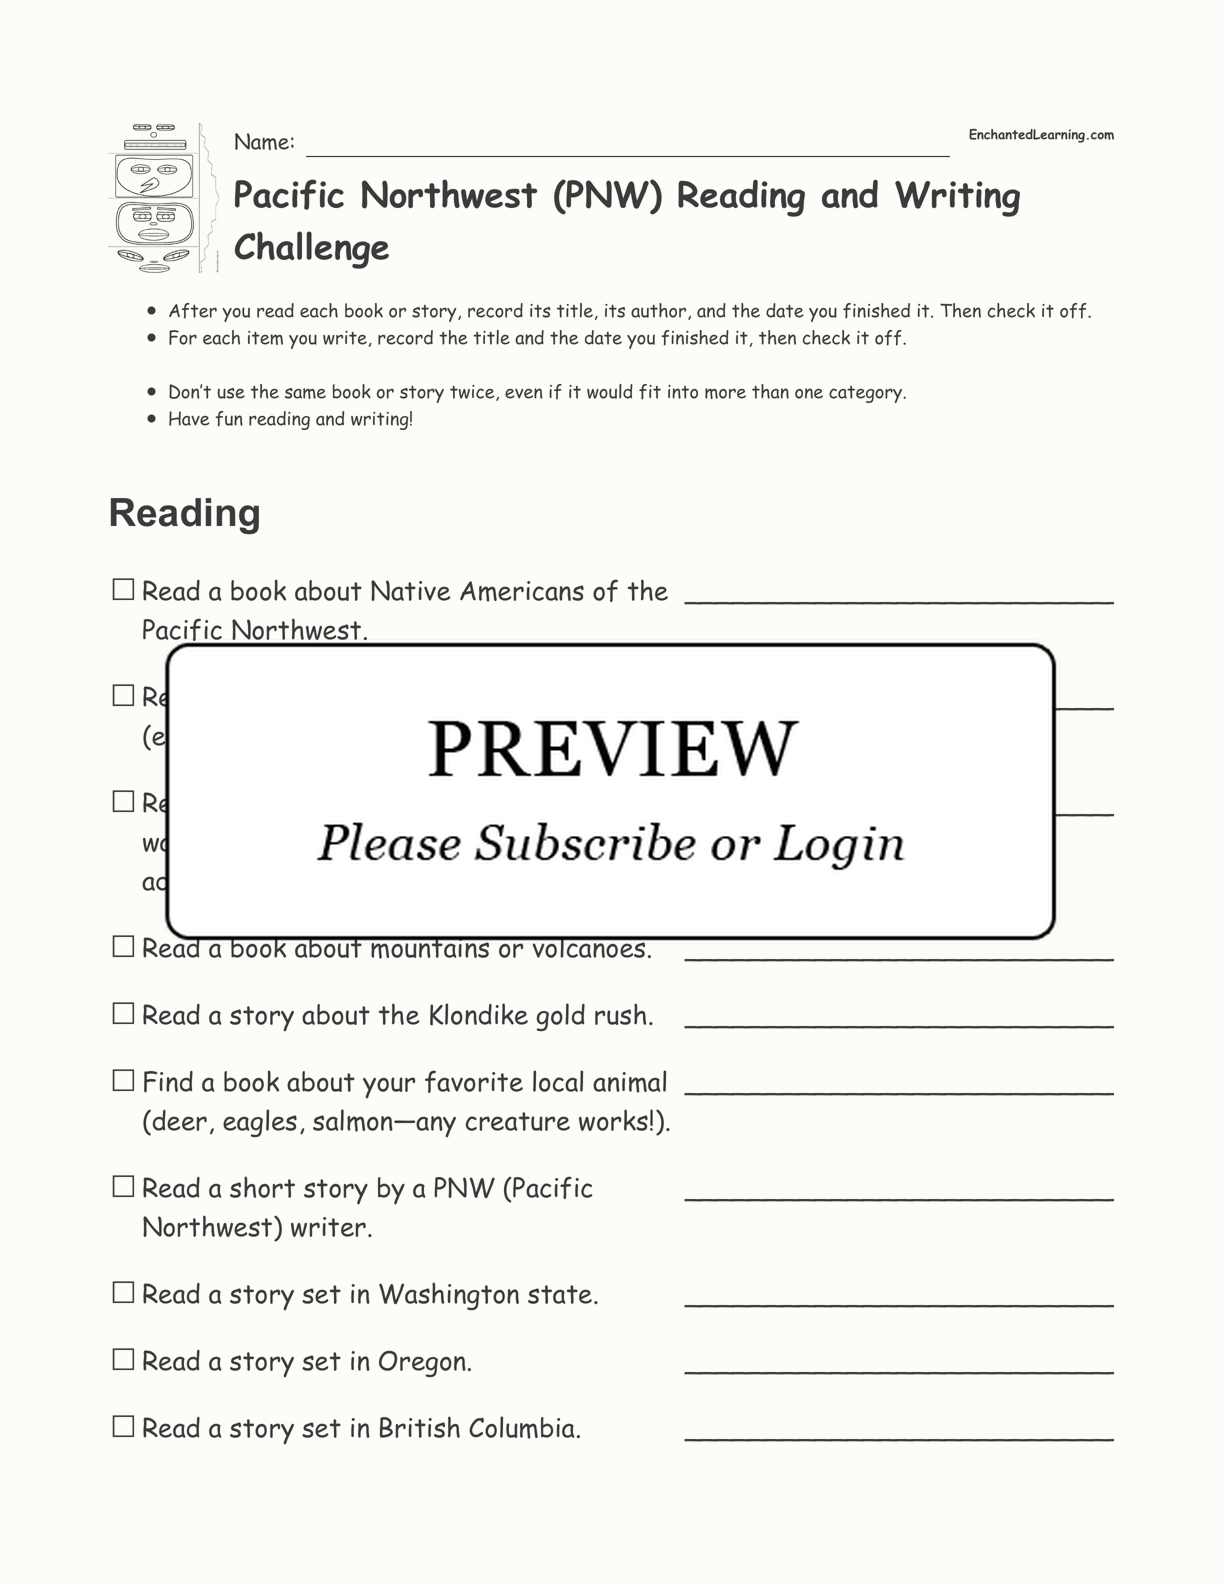 Pacific Northwest (PNW) Reading and Writing Challenge interactive printout page 1